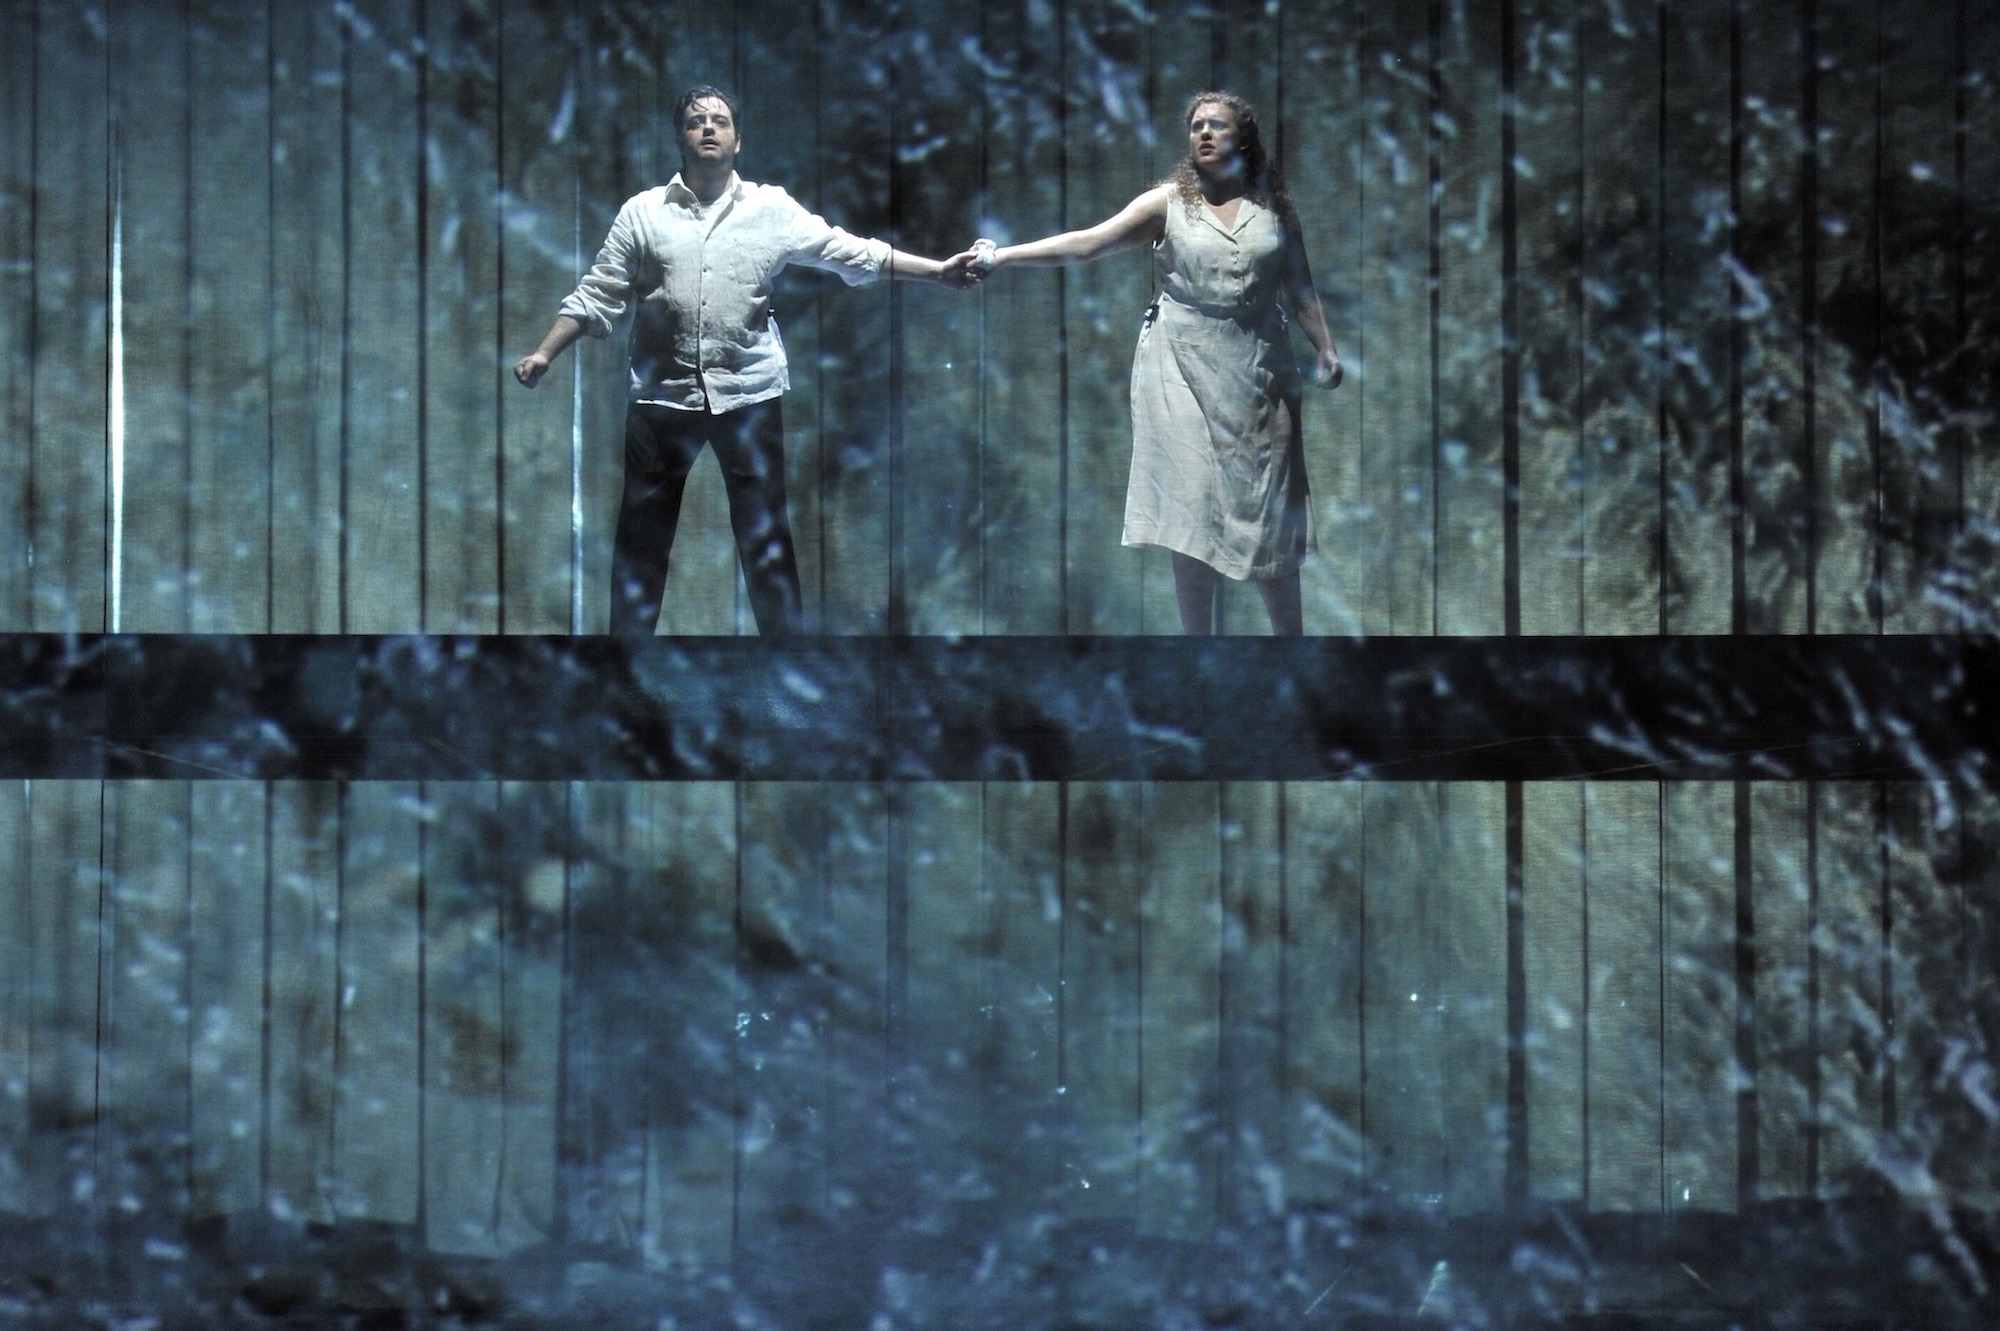 A pair of lovers hold each other's hands as they look at a threat, while standing on a raised bridge across the stage